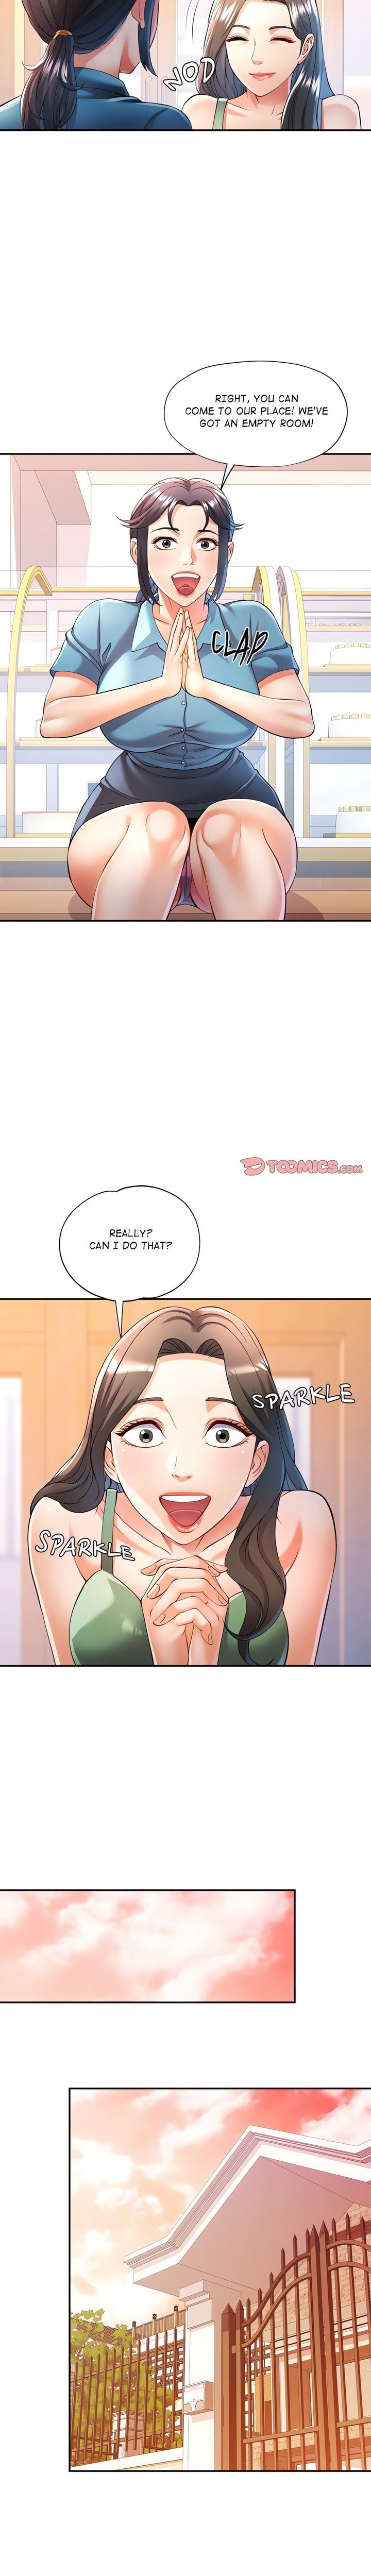 in-her-place-chap-25-4